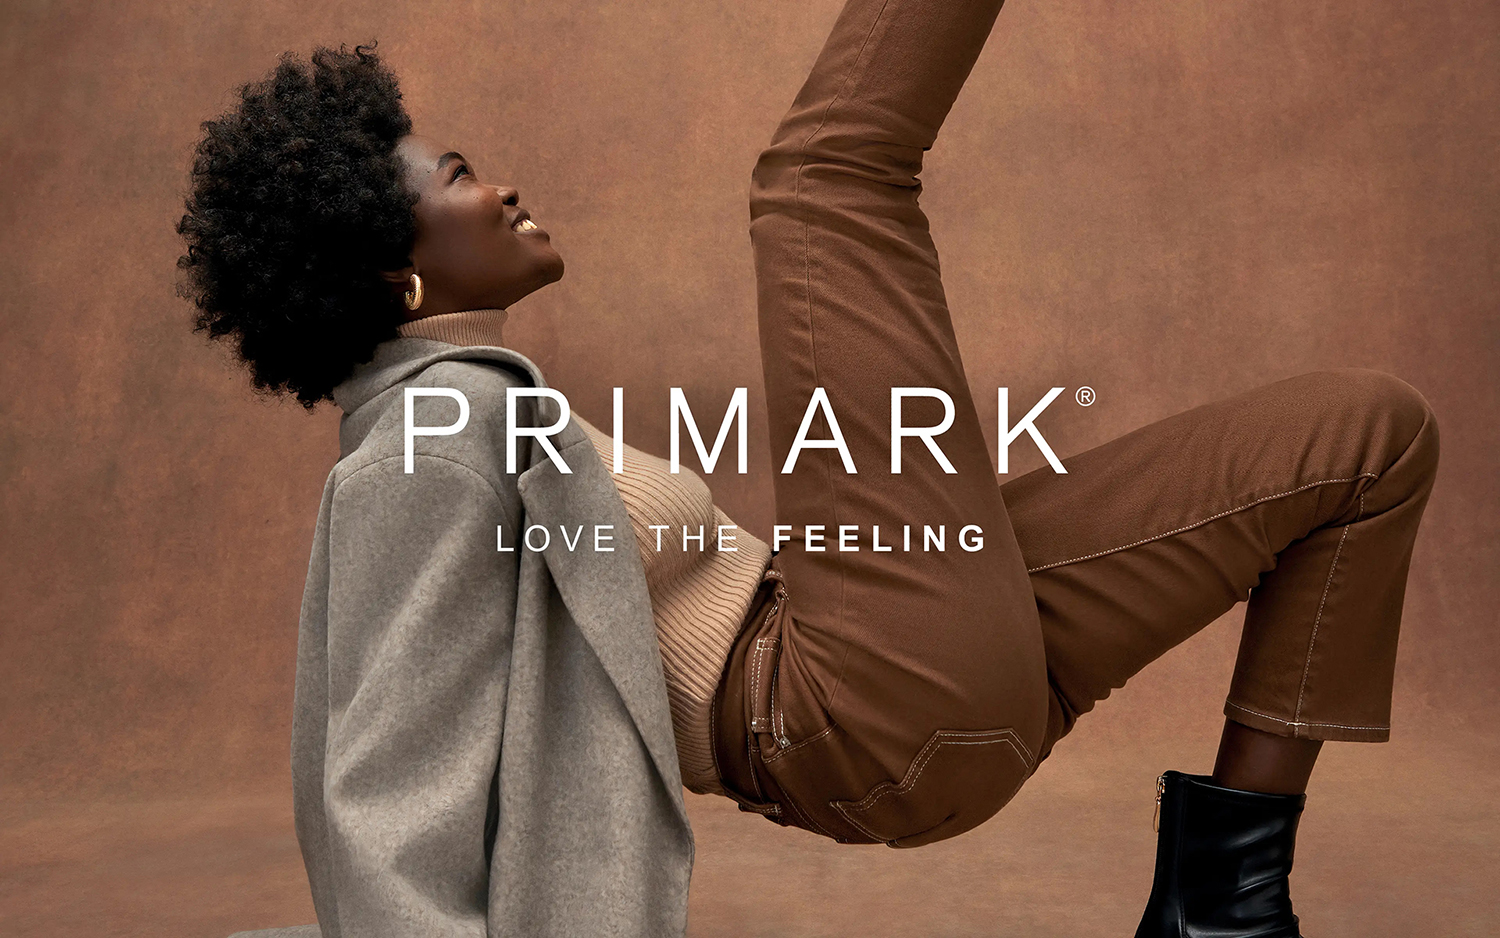 From Budget to Benefit – a Global Primark Rebrand to Inspire a Bigger, Brighter Feeling